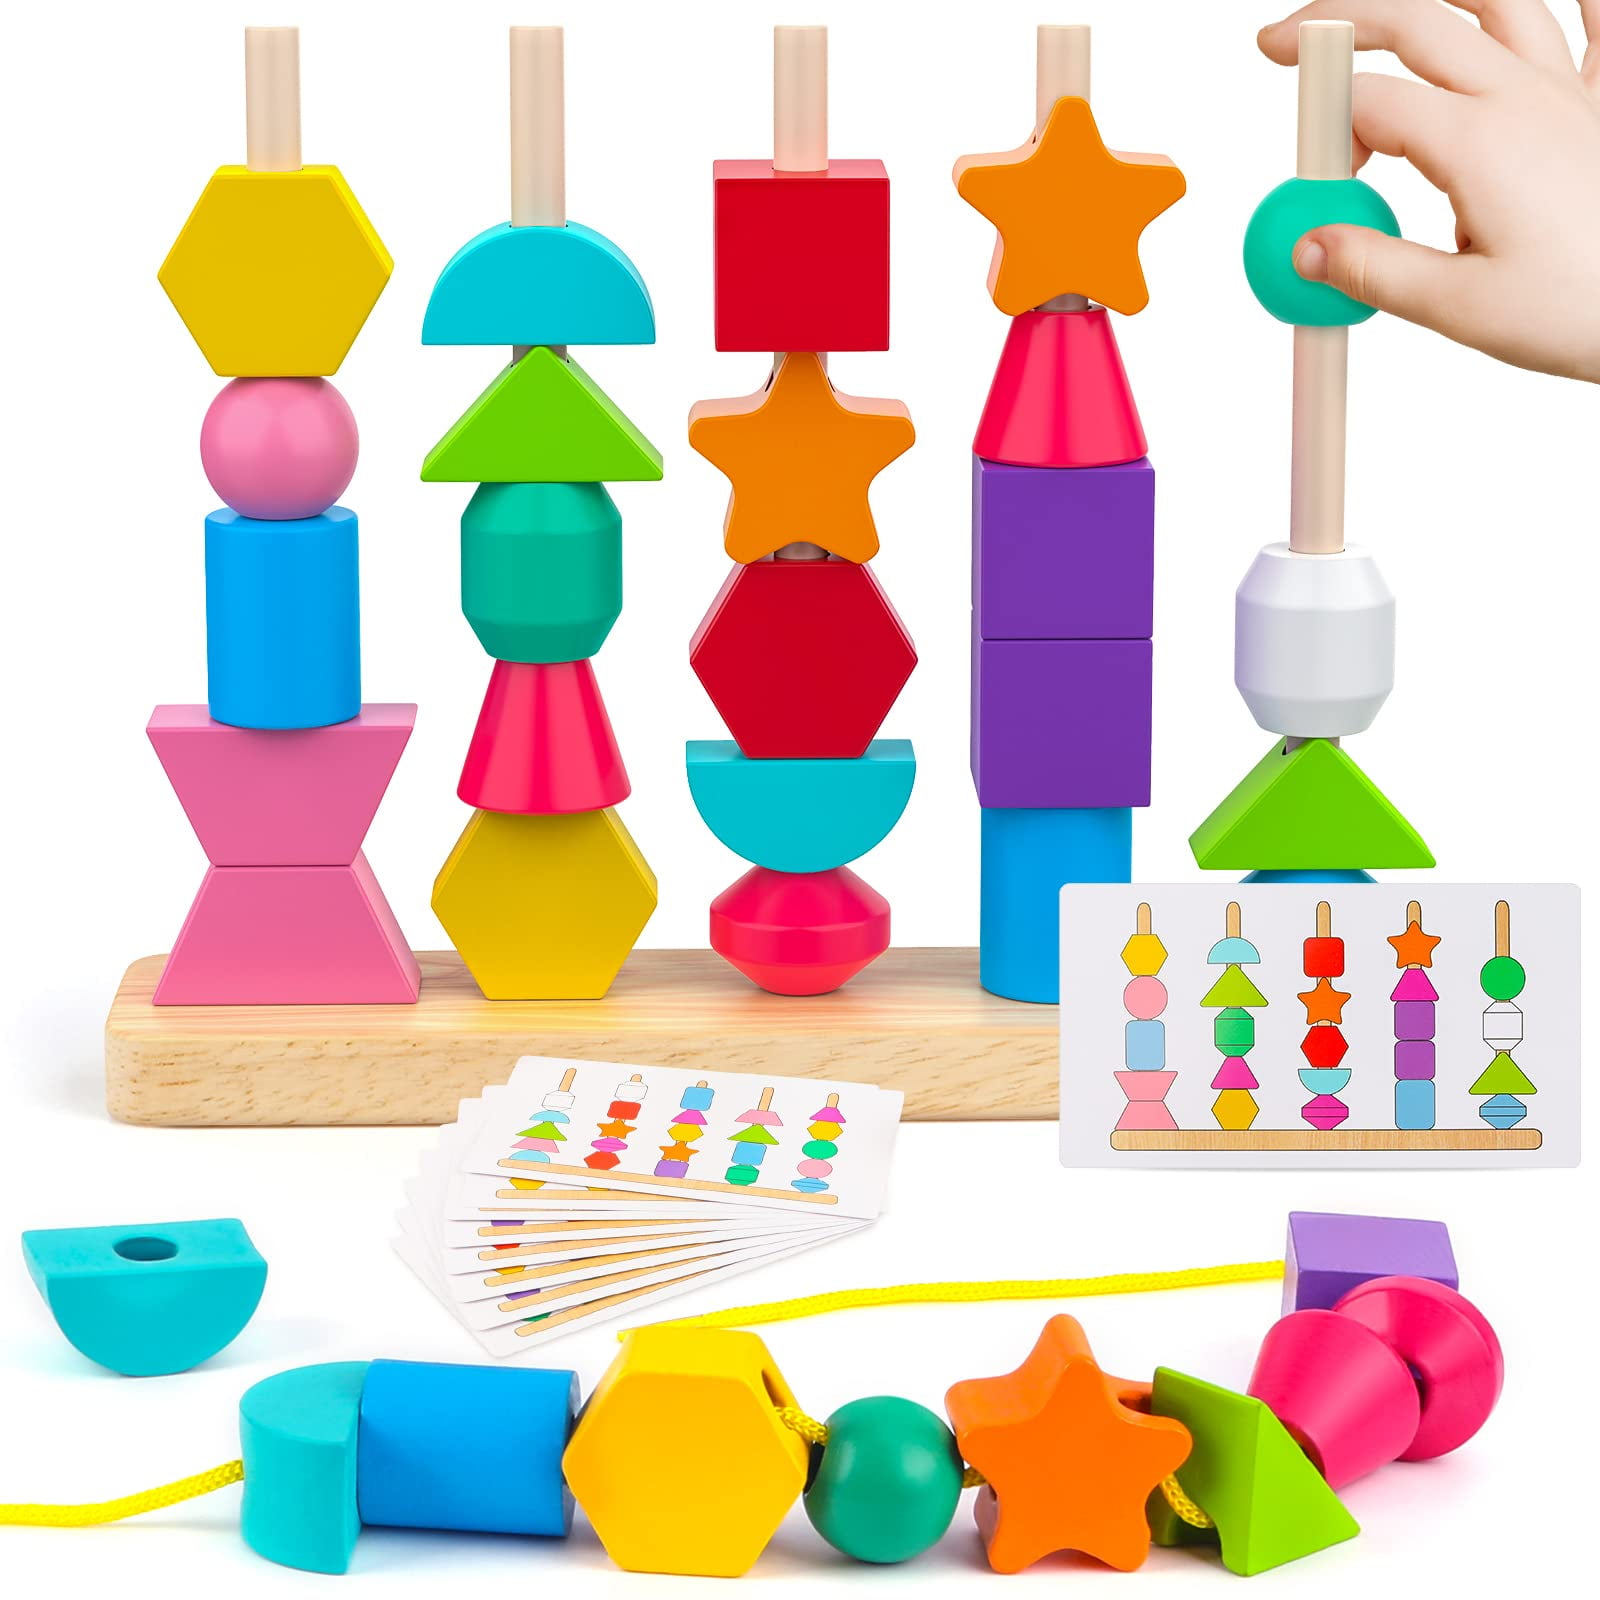  Easter Shapes Jumbo Crayons [Montessori] for Toddlers ages 4-8, Development Art & Activity Set, Easter Shape Crayons, Non Toxic 9  Colors & Pcs